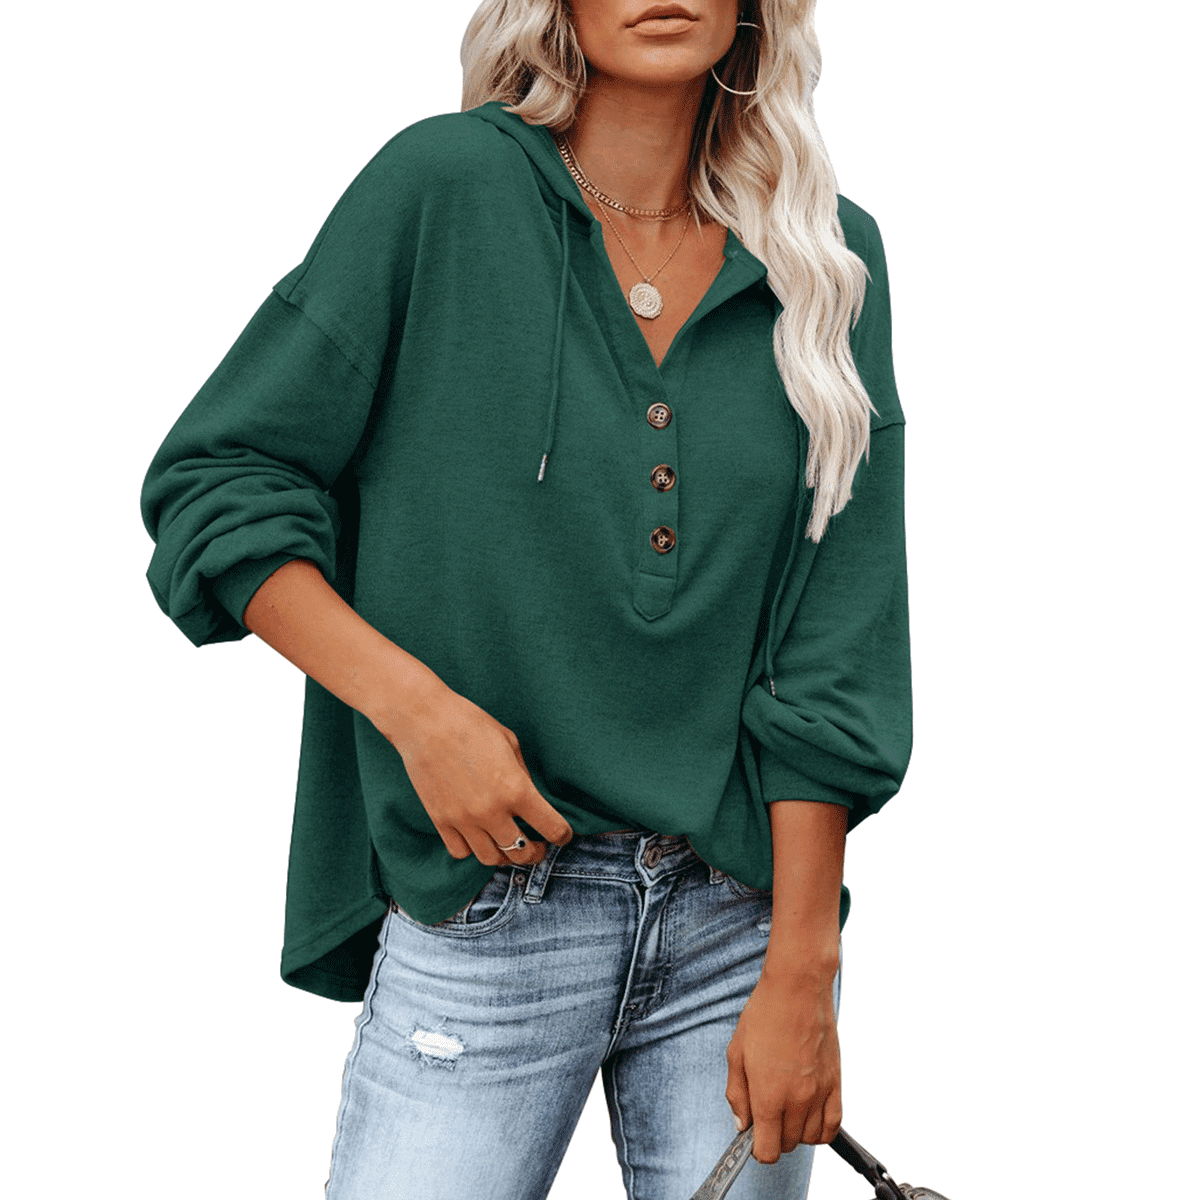 Jeanewpole1 Womens Plus Size Sweater Oversized V Neck High Low Hem Loose Knitted Pullover Tops 